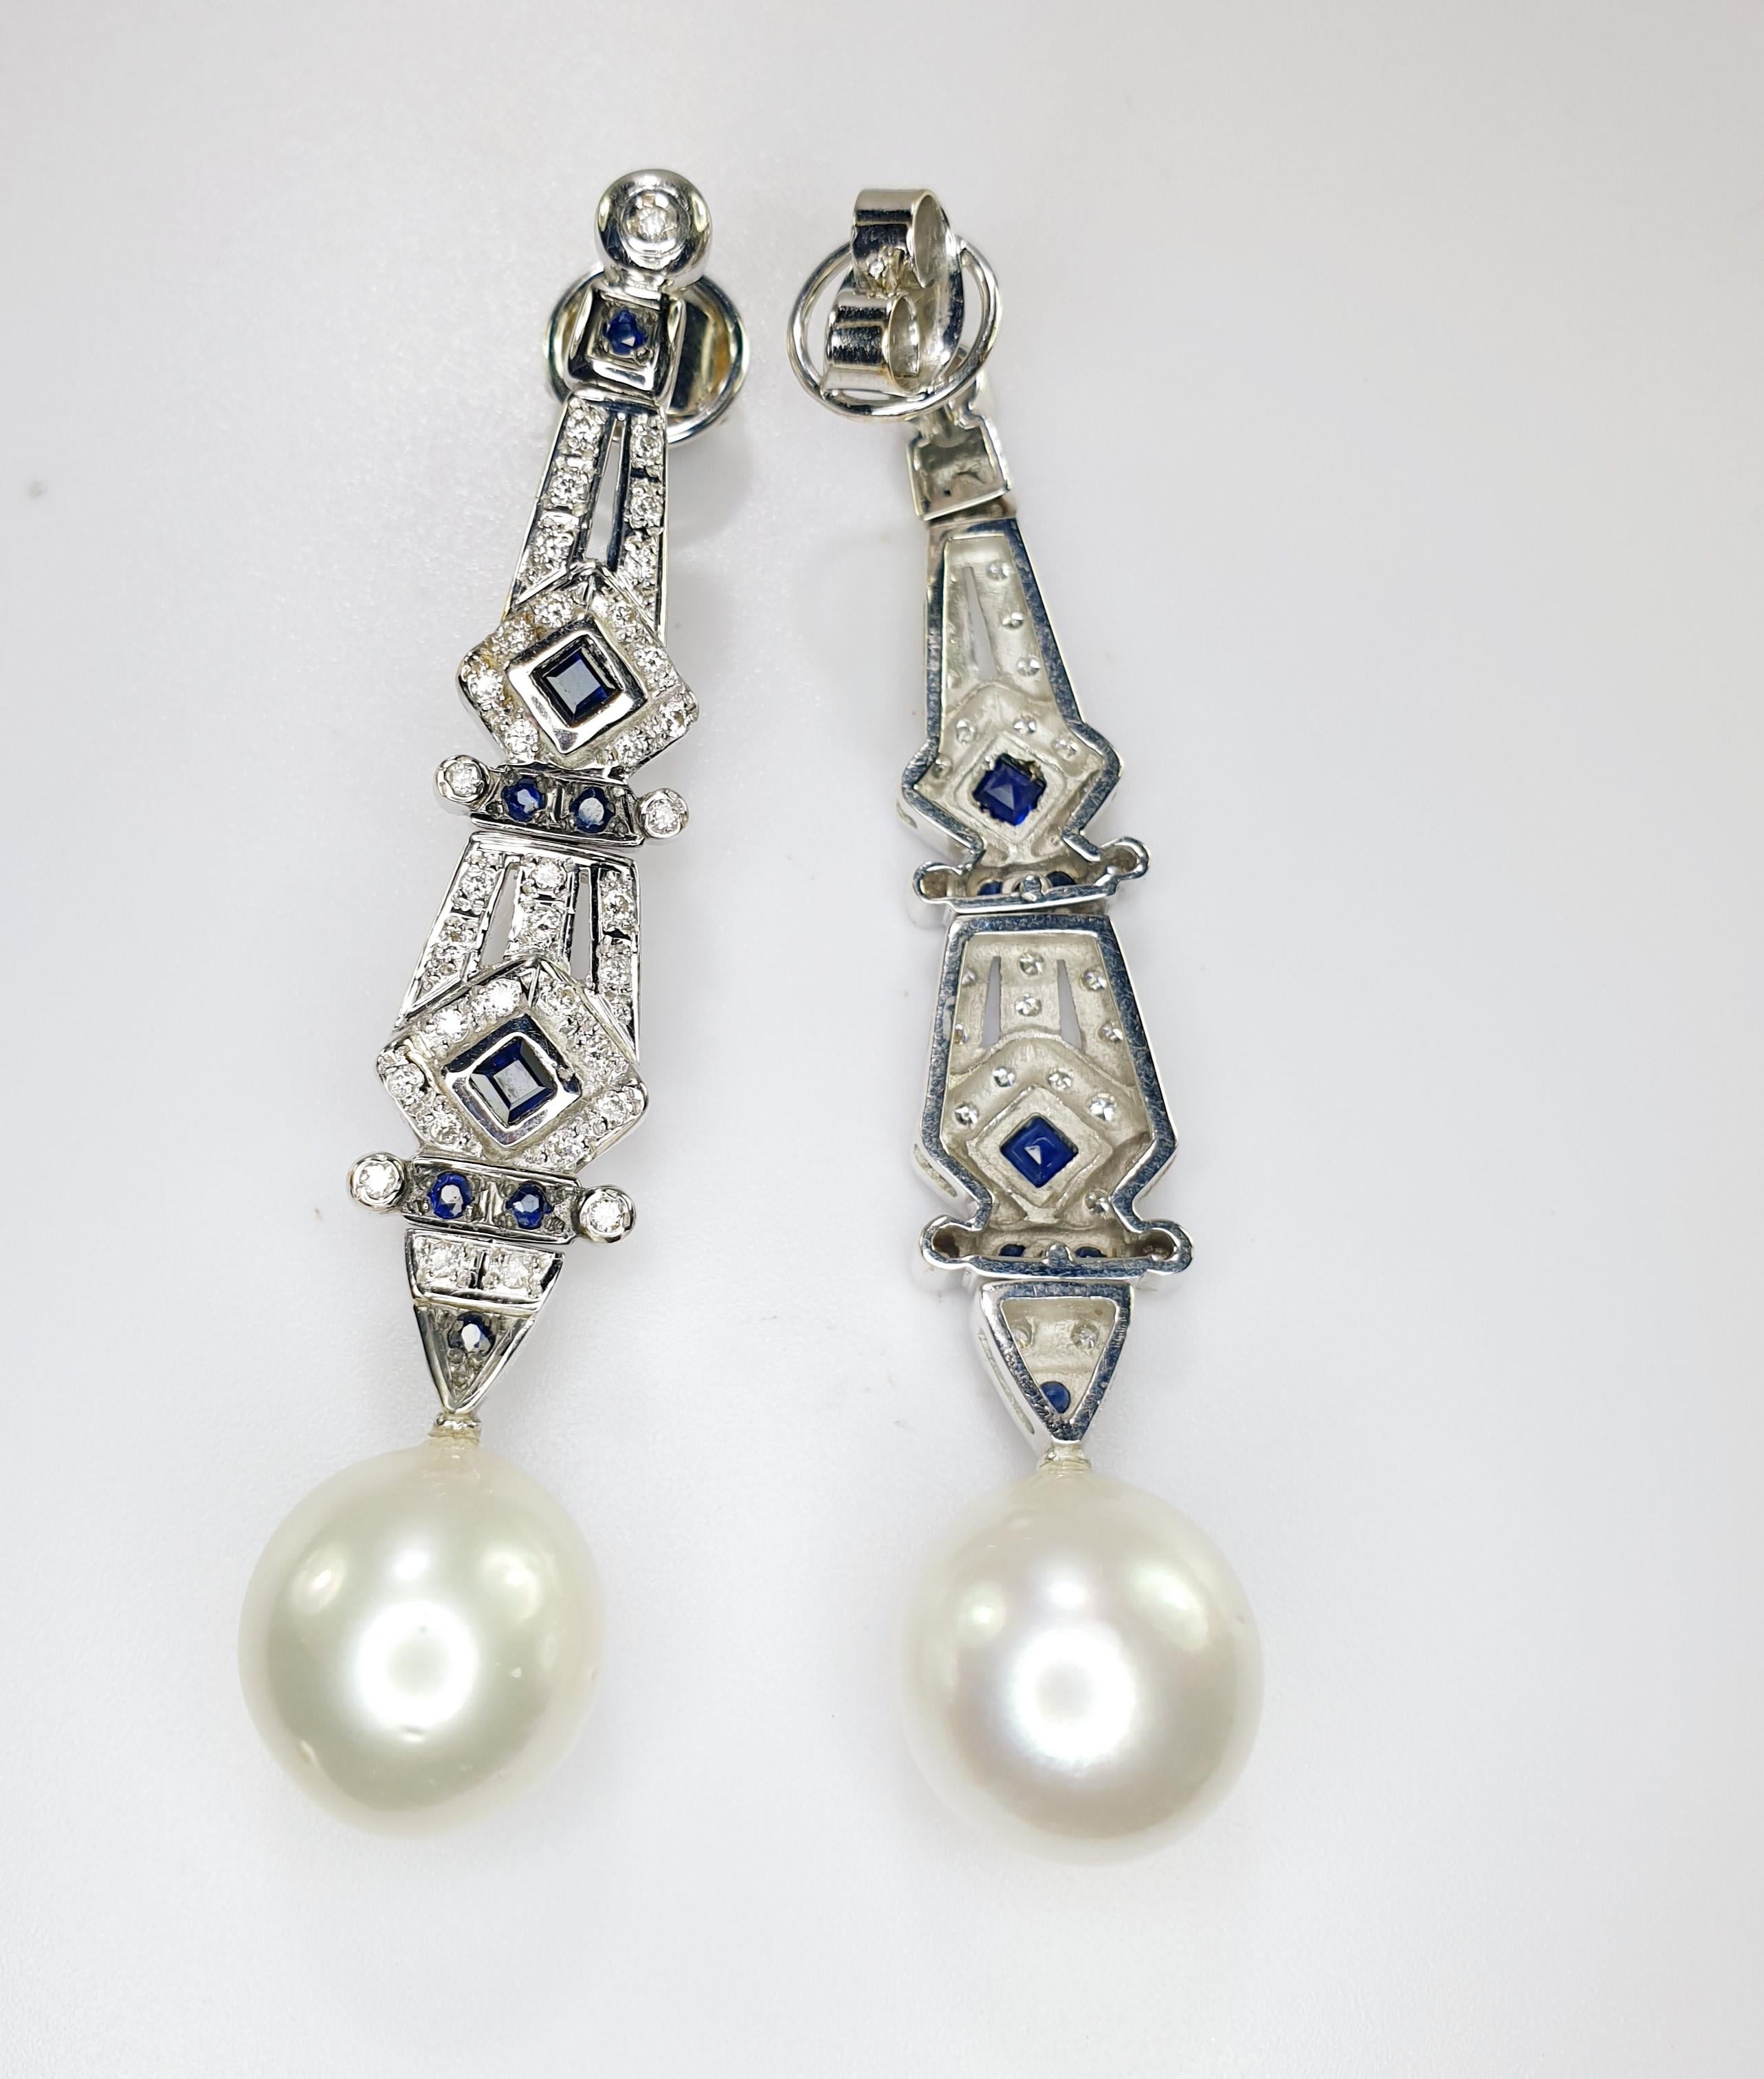 Diamond and sapphire cultivated 10mm/0,39inches  pearl earring 
diamonds and saphhires set in an art deco columnar style
Length 60mm  /2,36 inches 

READY TO SHIP
*Shipment of this piece is not affected by COVID-19. Orders welcome!*
STONES
◘ Fair